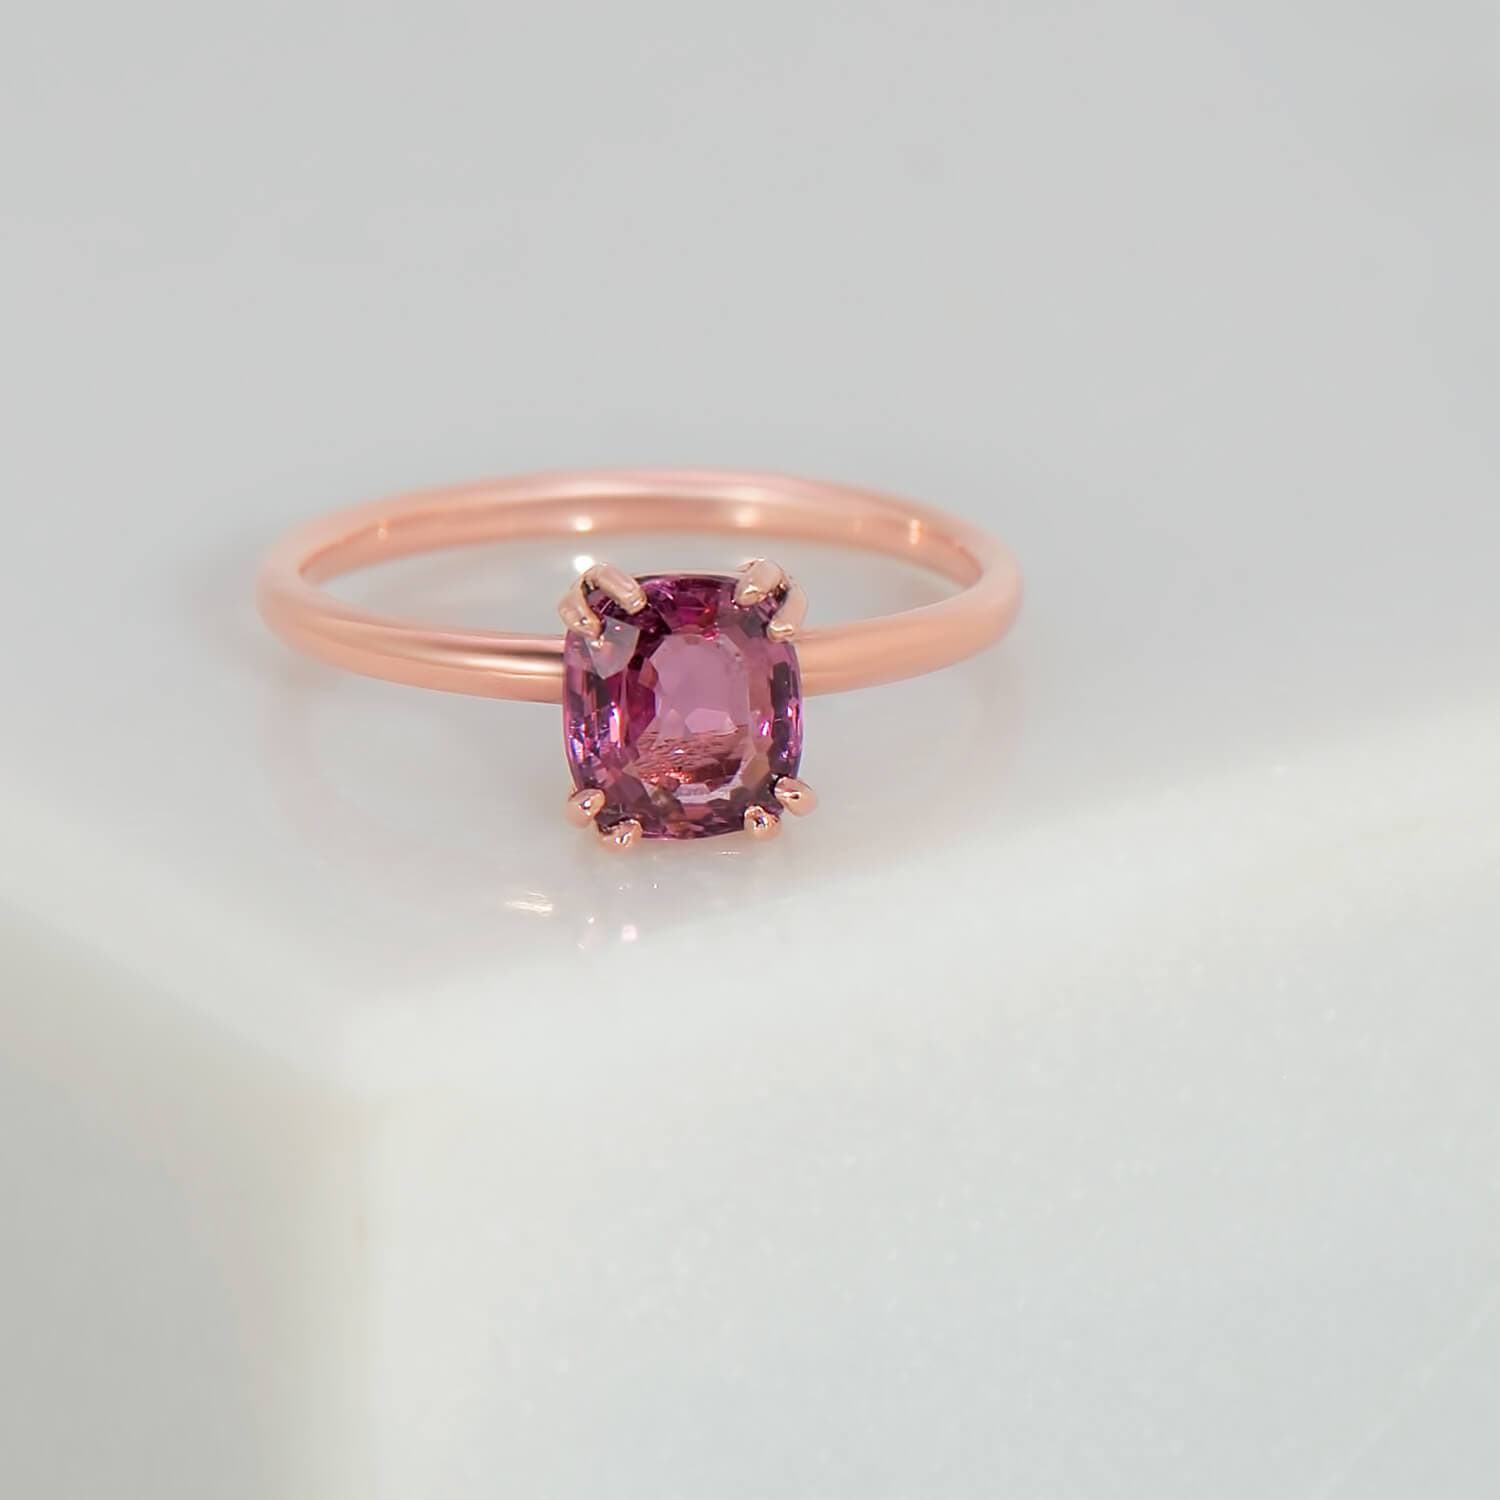 Recycled 14 rose gold solitaire engagement ring containing a 0.66 carat natural pink recycled spinel set in an eight prong setting. The band has been high polished with an oval profile with a width of 1.80mm and a thickness of 1.2mm.